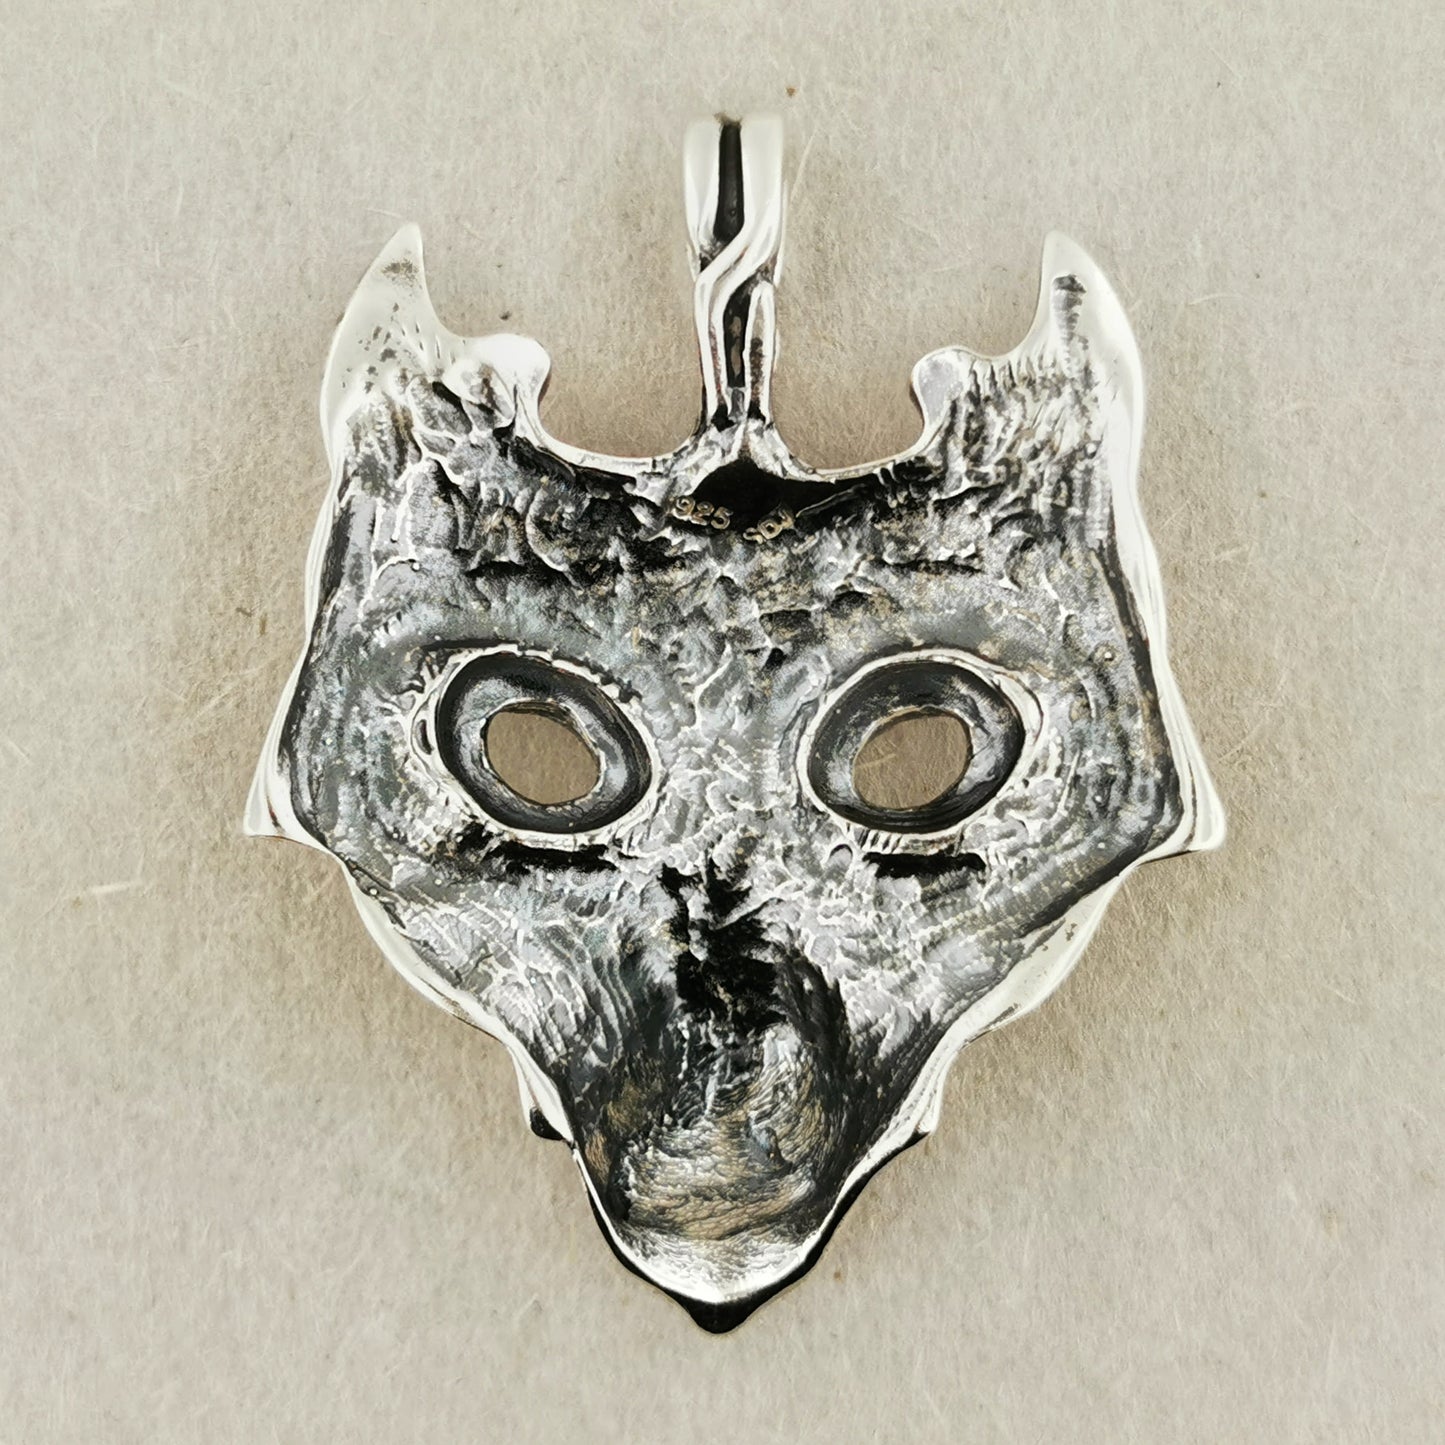 Tribal Wolf Head Pendant in Sterling Silver or Antique Bronze, Tribal Wolf Pendant, Silver Tribal Jewelry, Silver Tribal Jewellery, Bronze Tribal Wolf Pendant, Silver Tribal Wolf Pendant, Bronze Tribal Jewelry, Bronze Tribal Jewellery, Bronze Wolf Charm, Silver Wolf Charm, Antique Bronze Wolf, Wolf Head Pendant, Silver Viking Jewelry, Bronze Viking Jewelry, Silver Animal Pendant, Bronze Animal Pendant